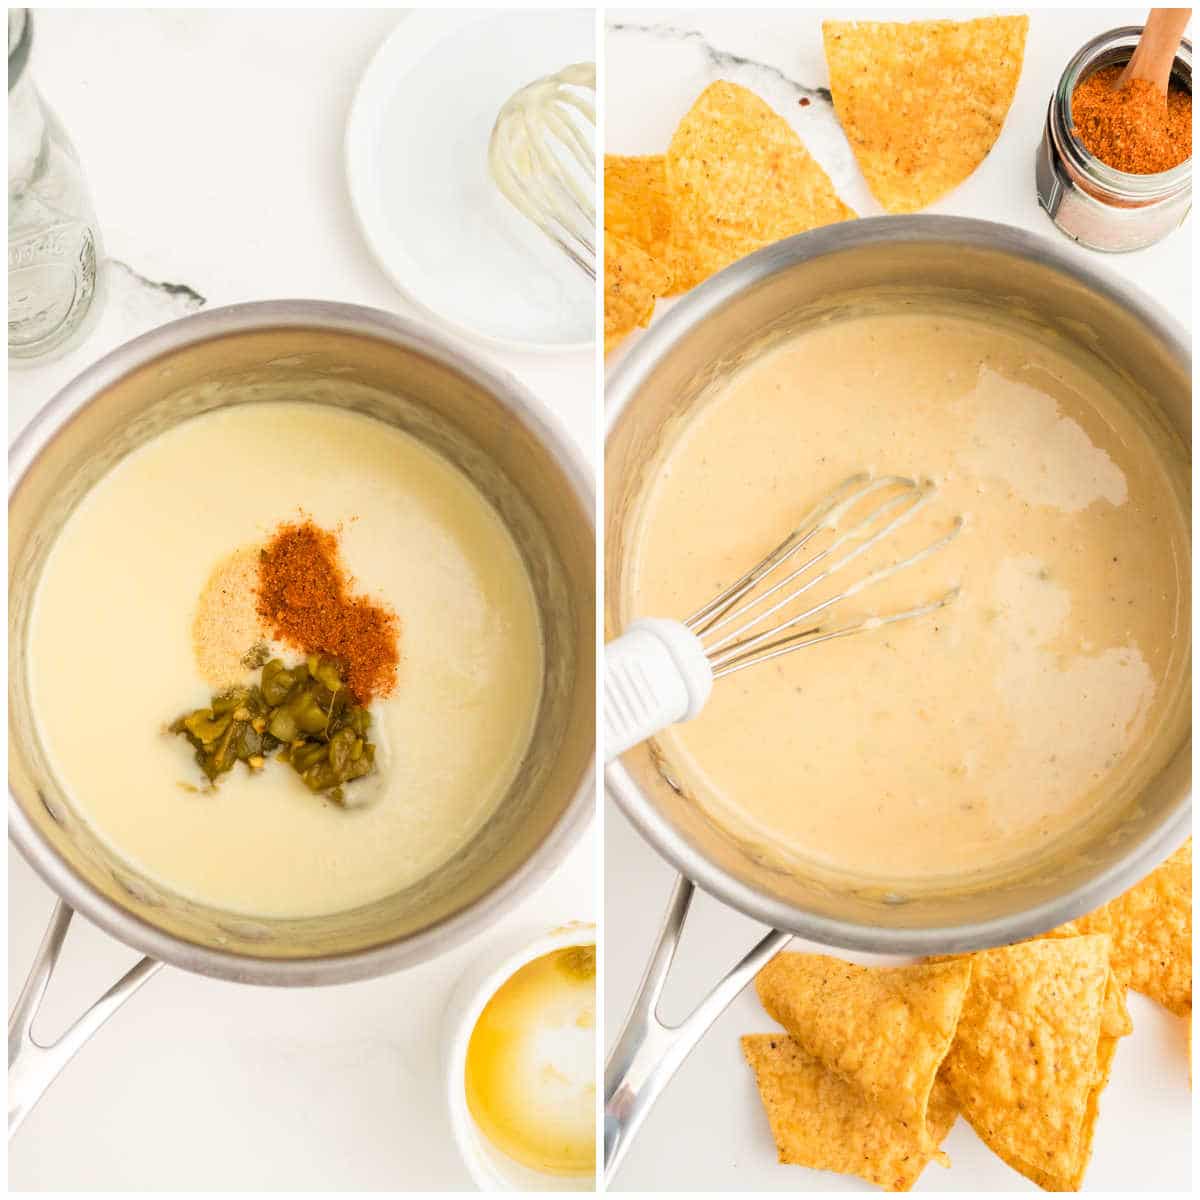 Steps to make queso.